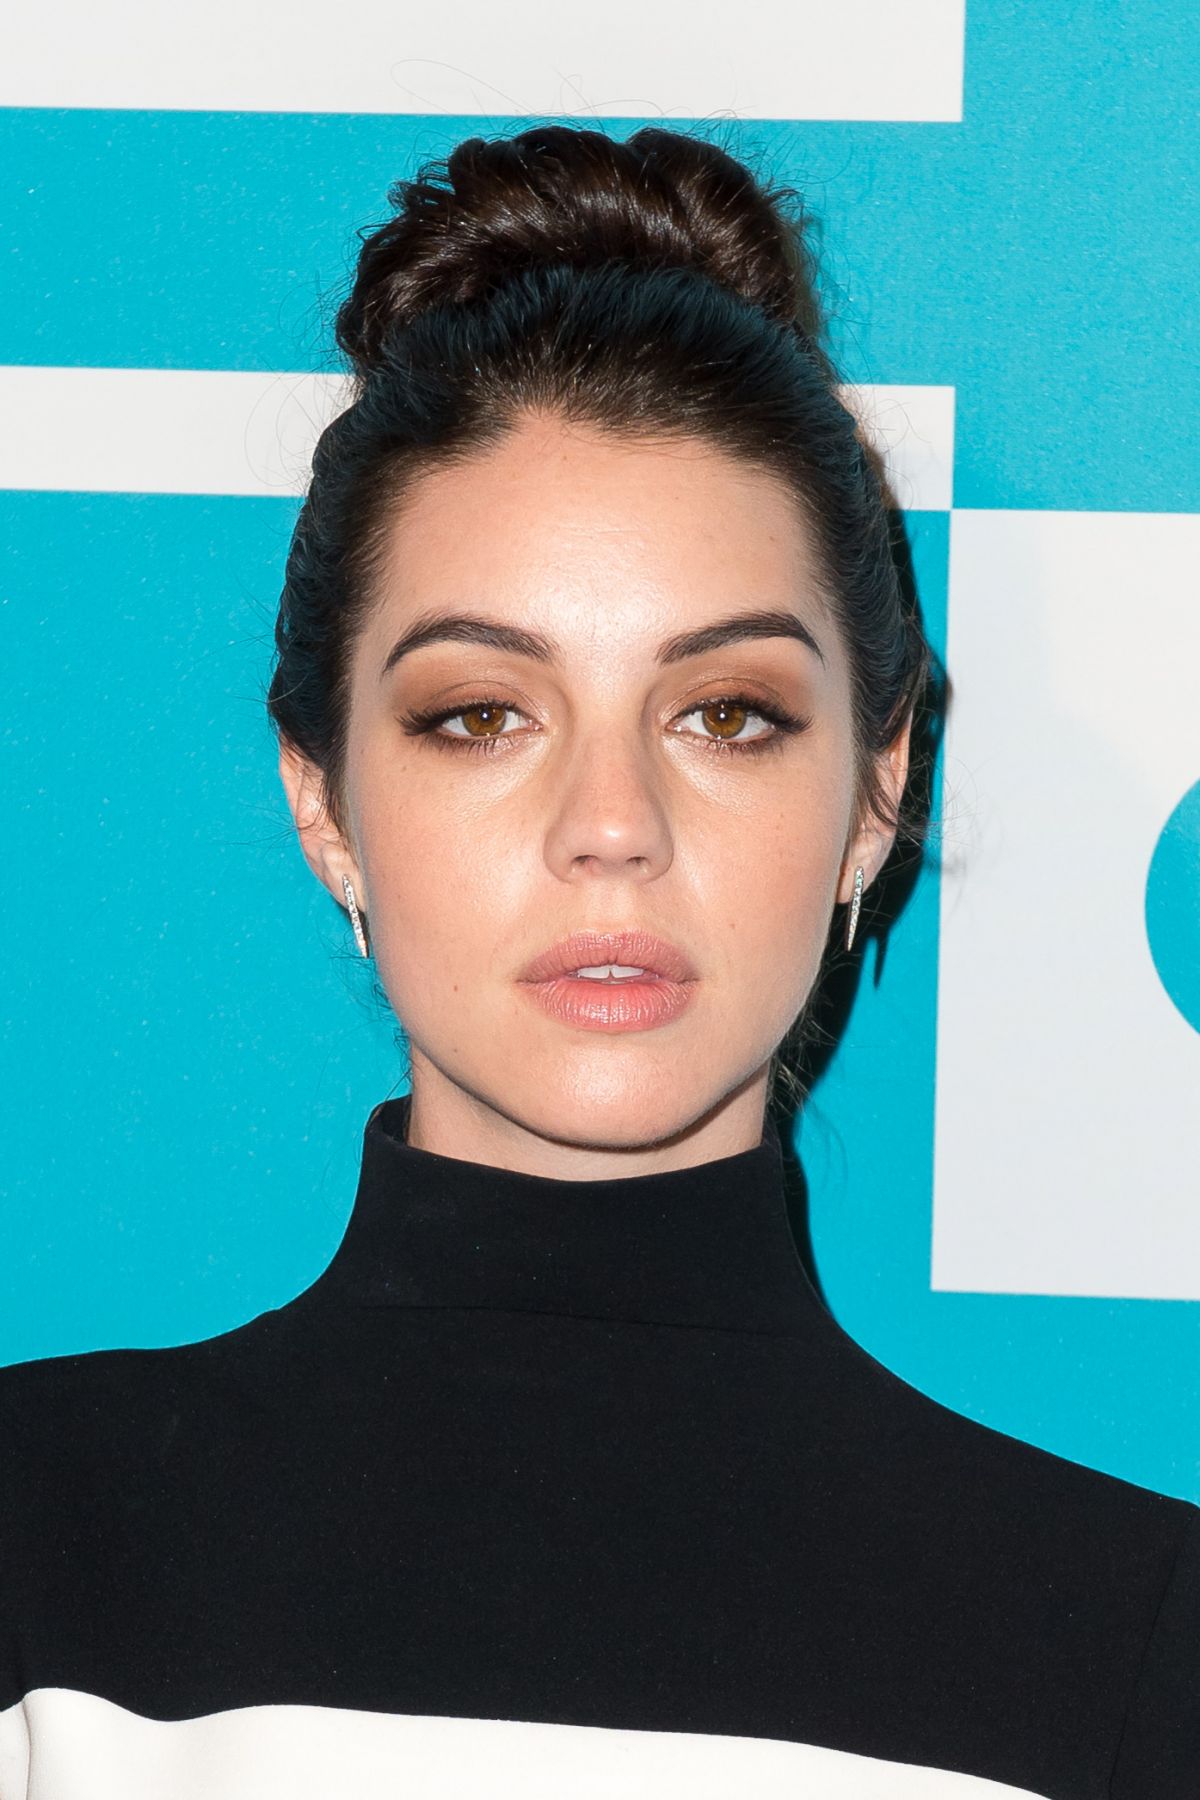 ADELAIDE KANE at CW Network’s 2015 Upfront in New York – HawtCelebs